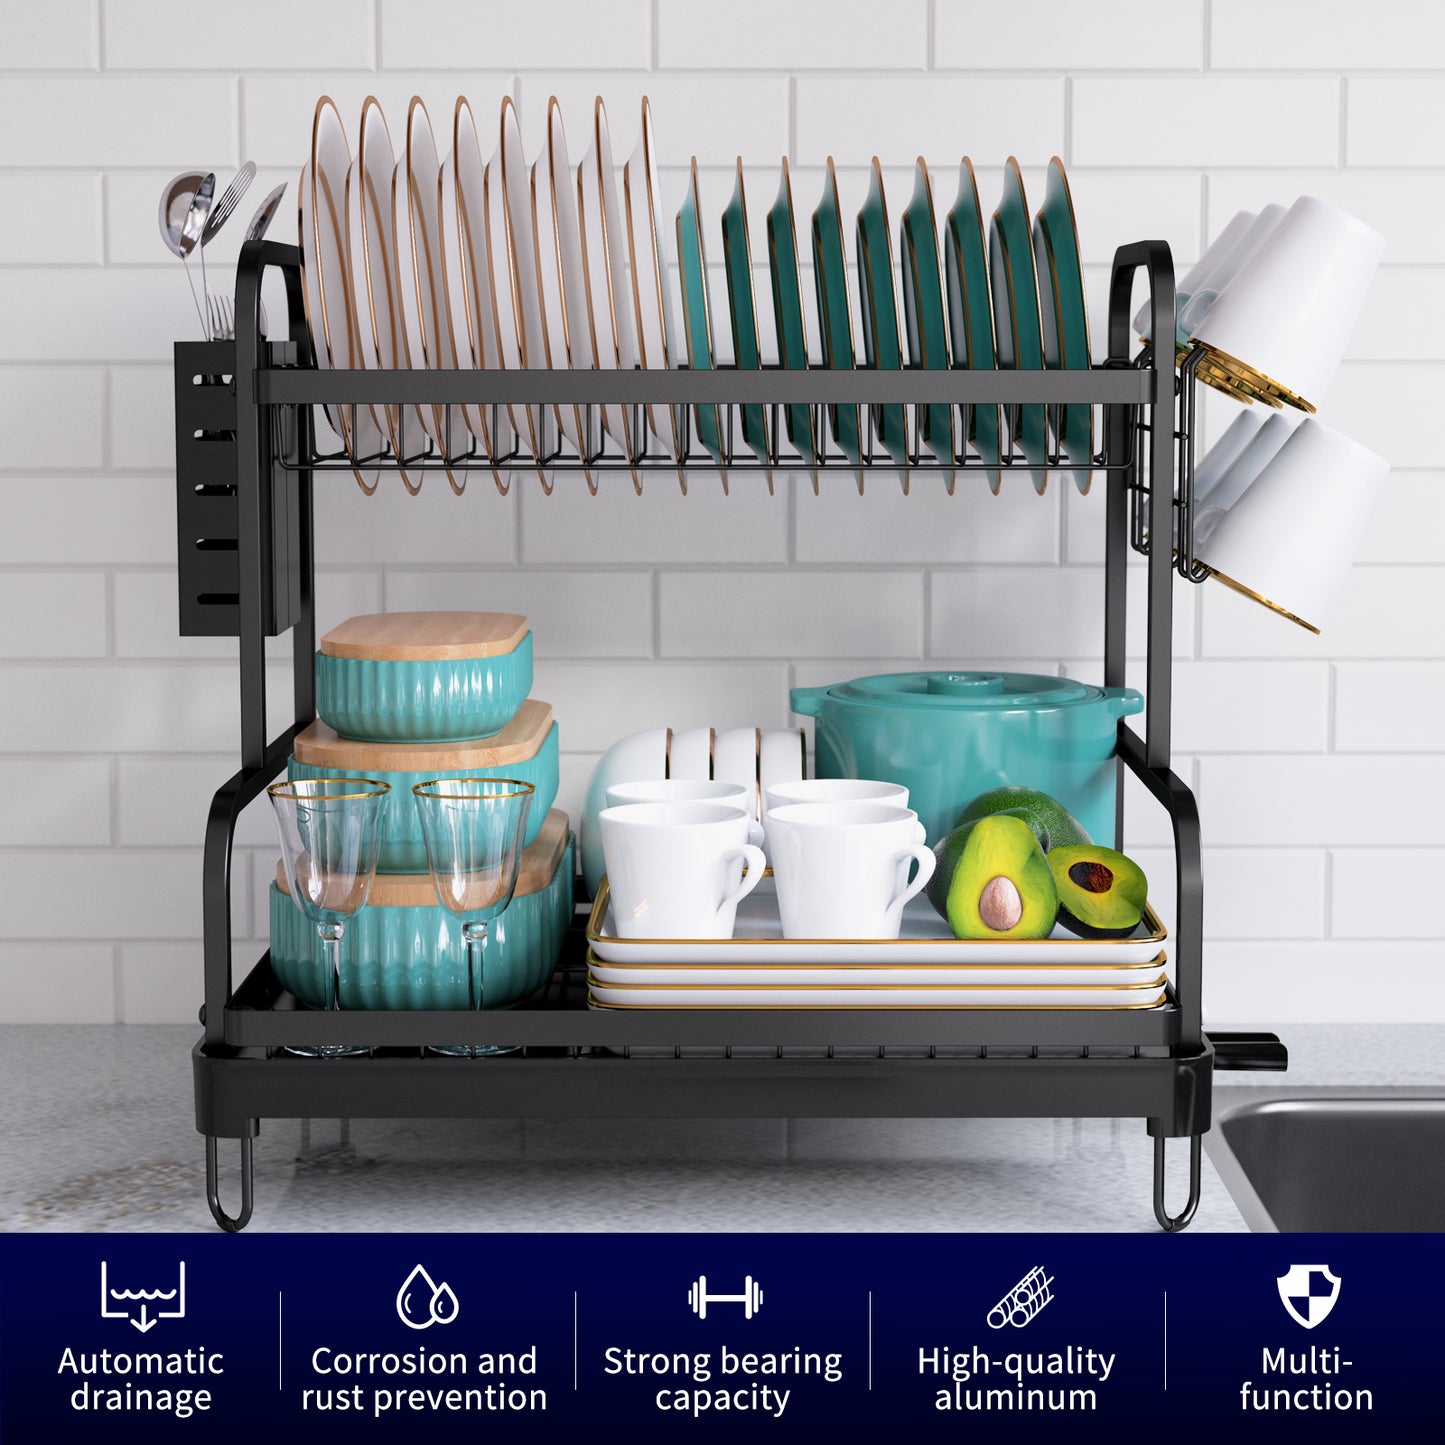 Kitsure Dish Drying Rack - Multipurpose 2-Tier Dish Rack, Dish Drainers for Kitchen Counter, Large-Capacity Dish Dryer, Kitchen Drying Rack for Dishes w/Cutlery Holder 4064BL（4064）